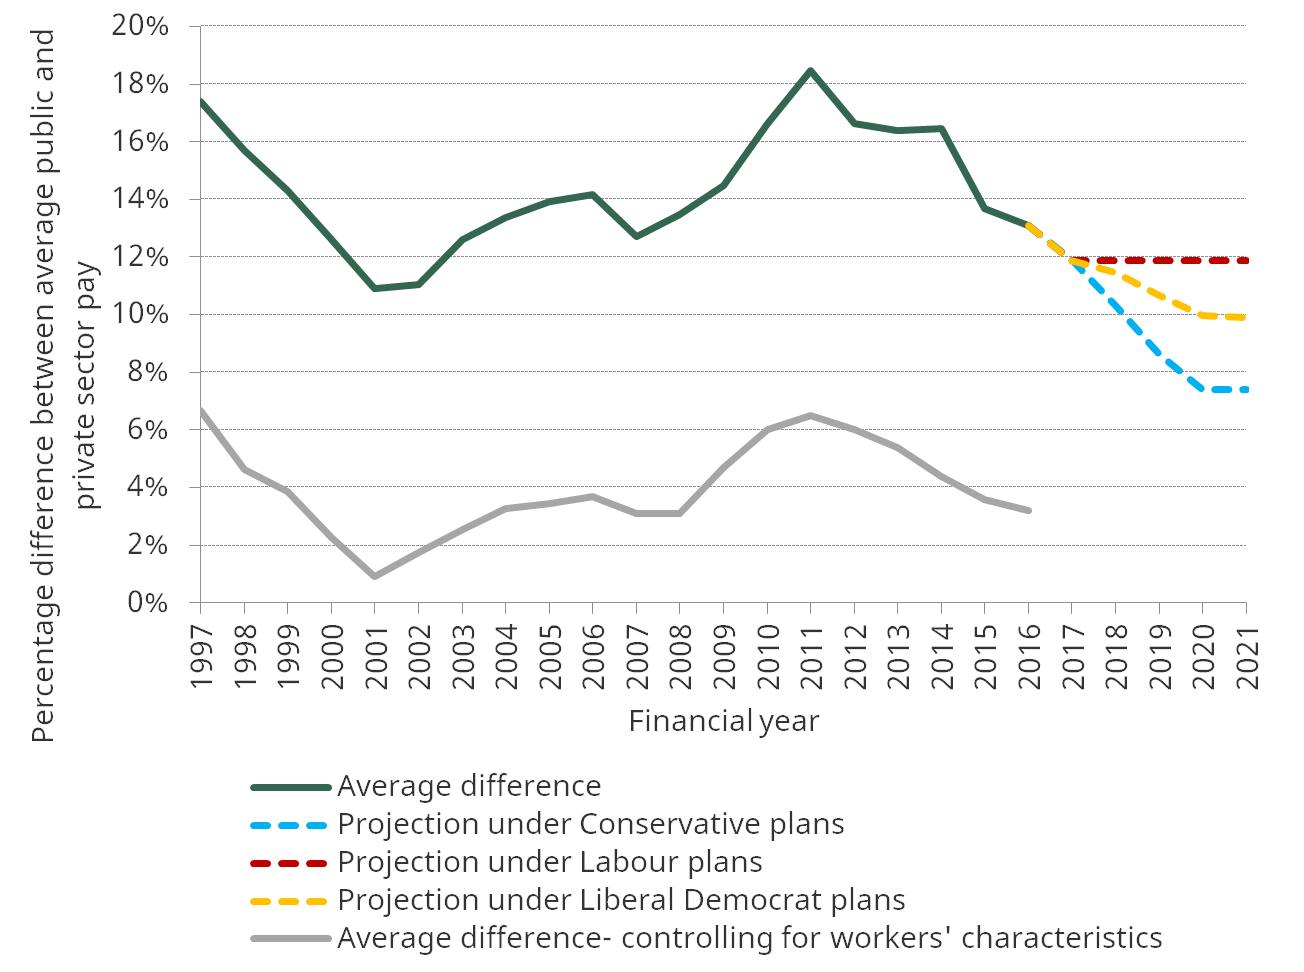 Figure 3. Difference between average public and private sector pay, including projections under different parties’ policies